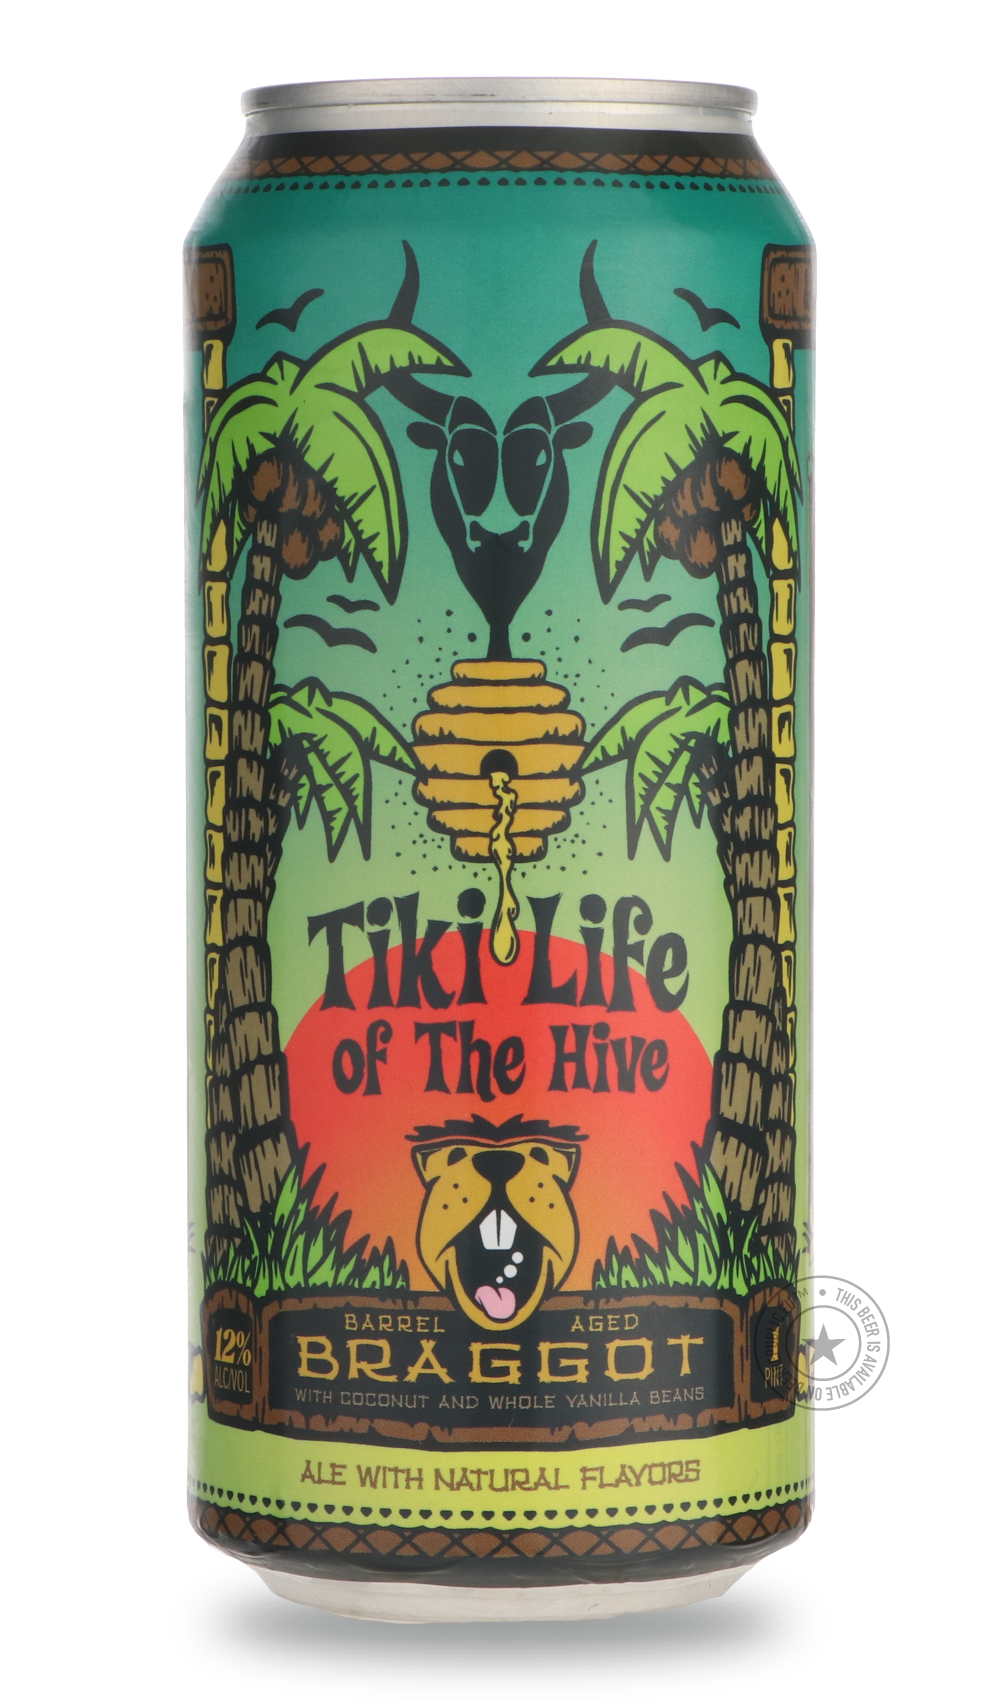 -Belching Beaver- Tiki Life of the Hive / Superstition-Specials- Only @ Beer Republic - The best online beer store for American & Canadian craft beer - Buy beer online from the USA and Canada - Bier online kopen - Amerikaans bier kopen - Craft beer store - Craft beer kopen - Amerikanisch bier kaufen - Bier online kaufen - Acheter biere online - IPA - Stout - Porter - New England IPA - Hazy IPA - Imperial Stout - Barrel Aged - Barrel Aged Imperial Stout - Brown - Dark beer - Blond - Blonde - Pilsner - Lager 